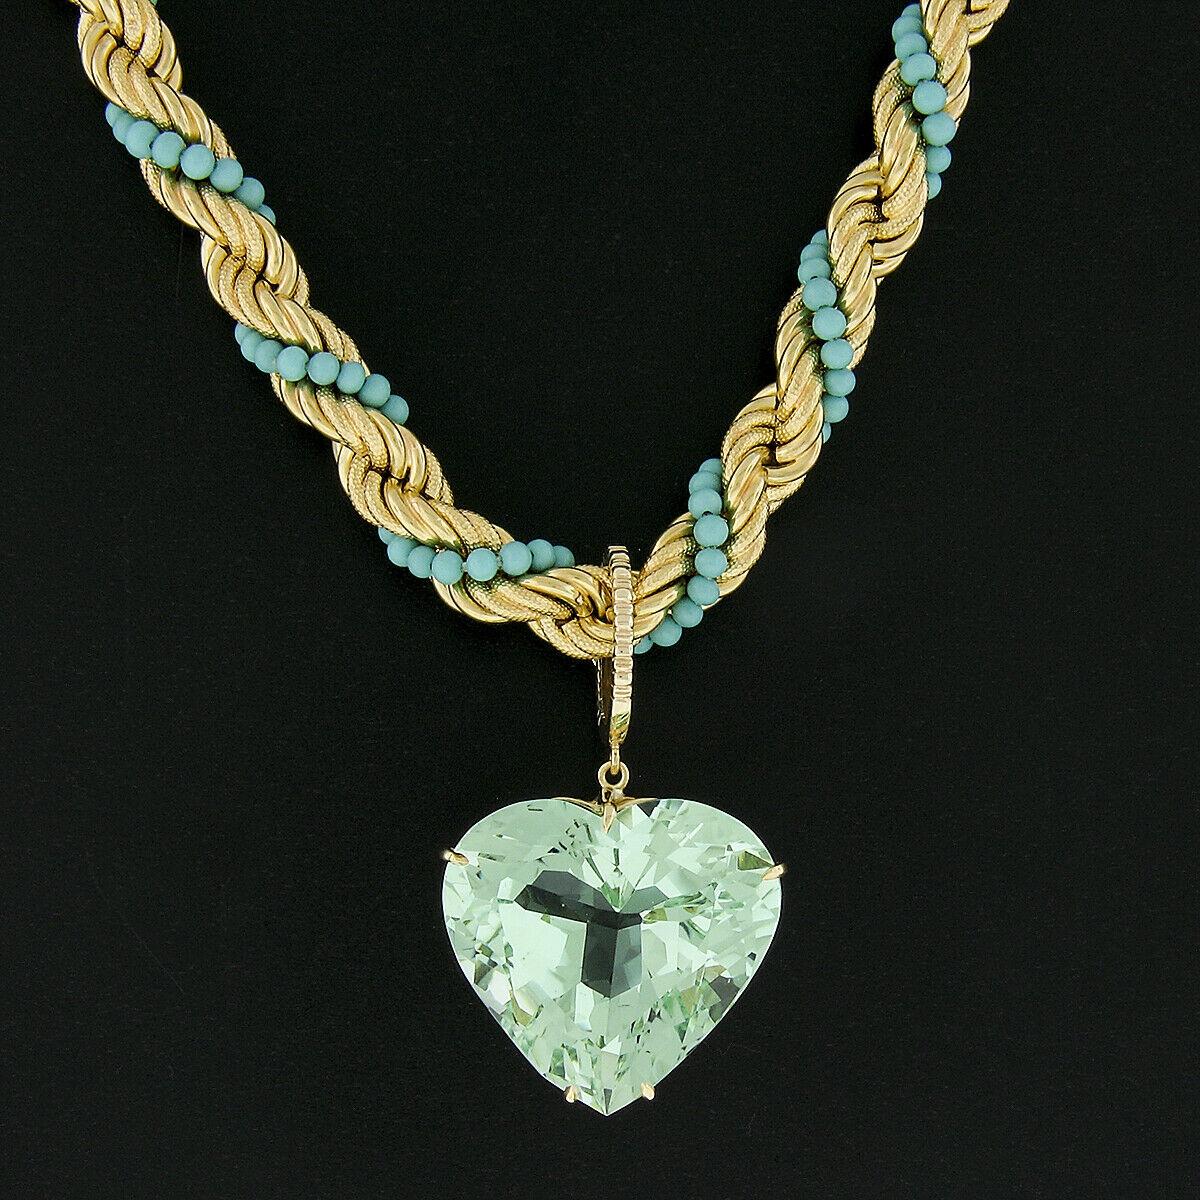 18K Gold GIA 53.58ctw Heart Aquamarine Enhancer Pendant & Turquoise Rope Chain For Sale 2